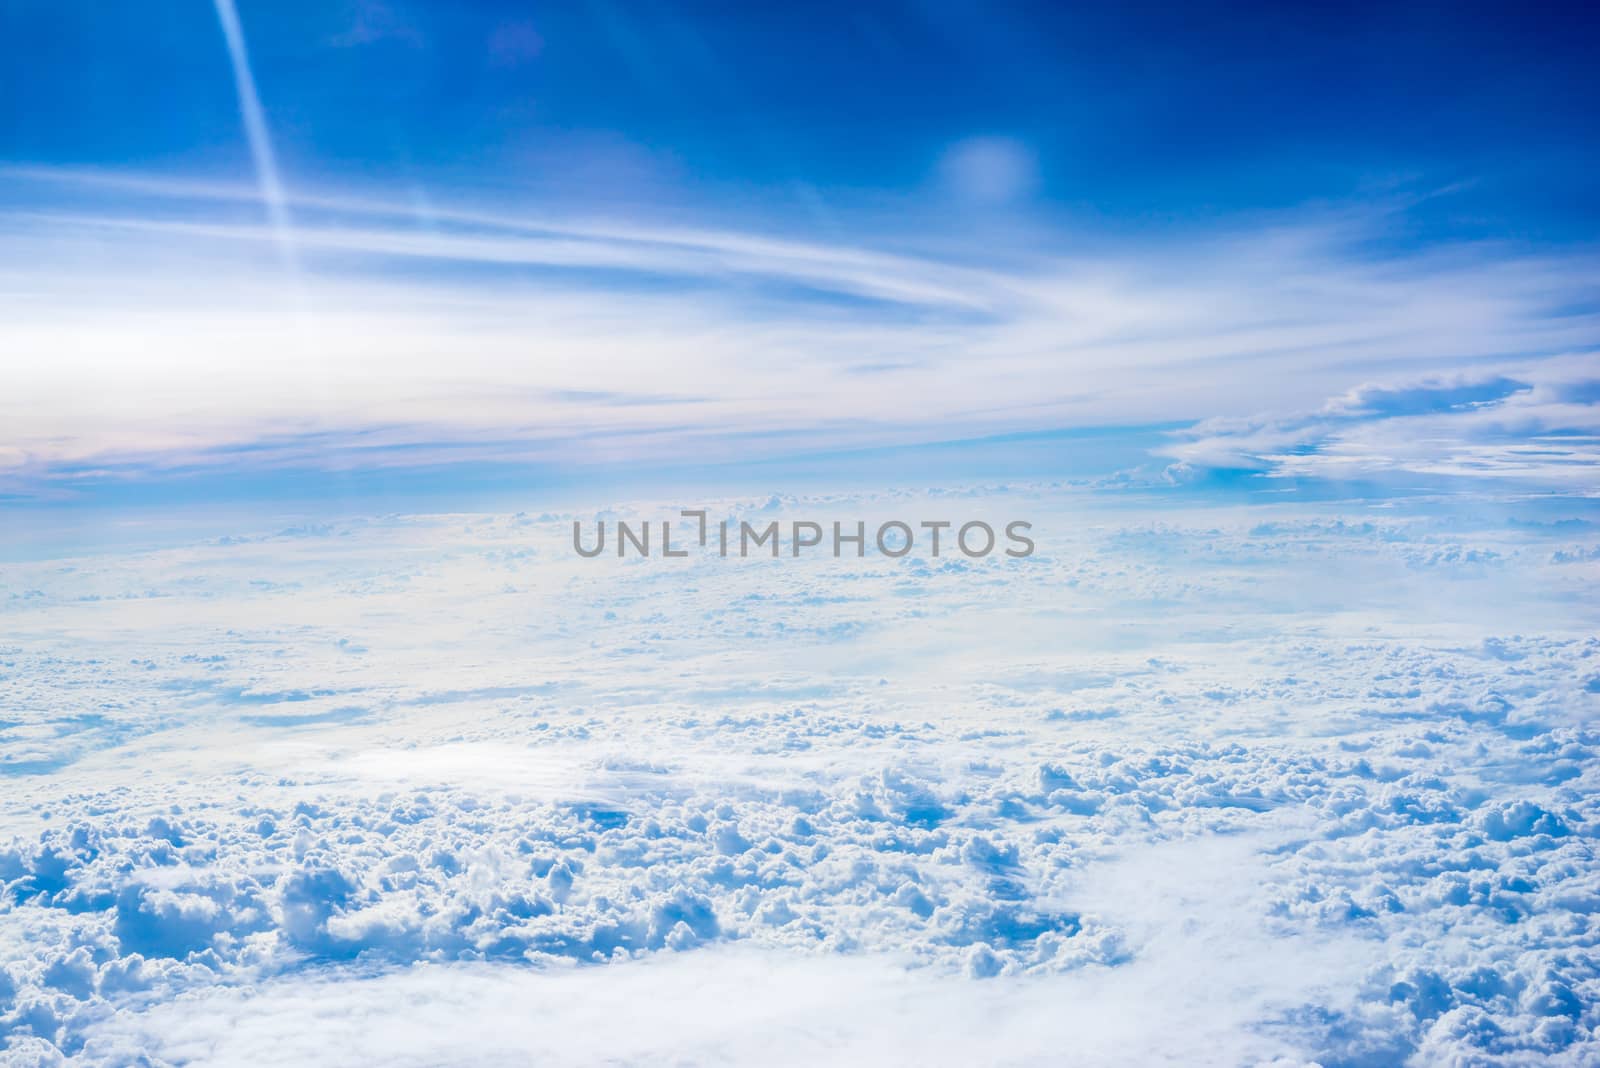 The View from the plane above the cloud and sky by iamway